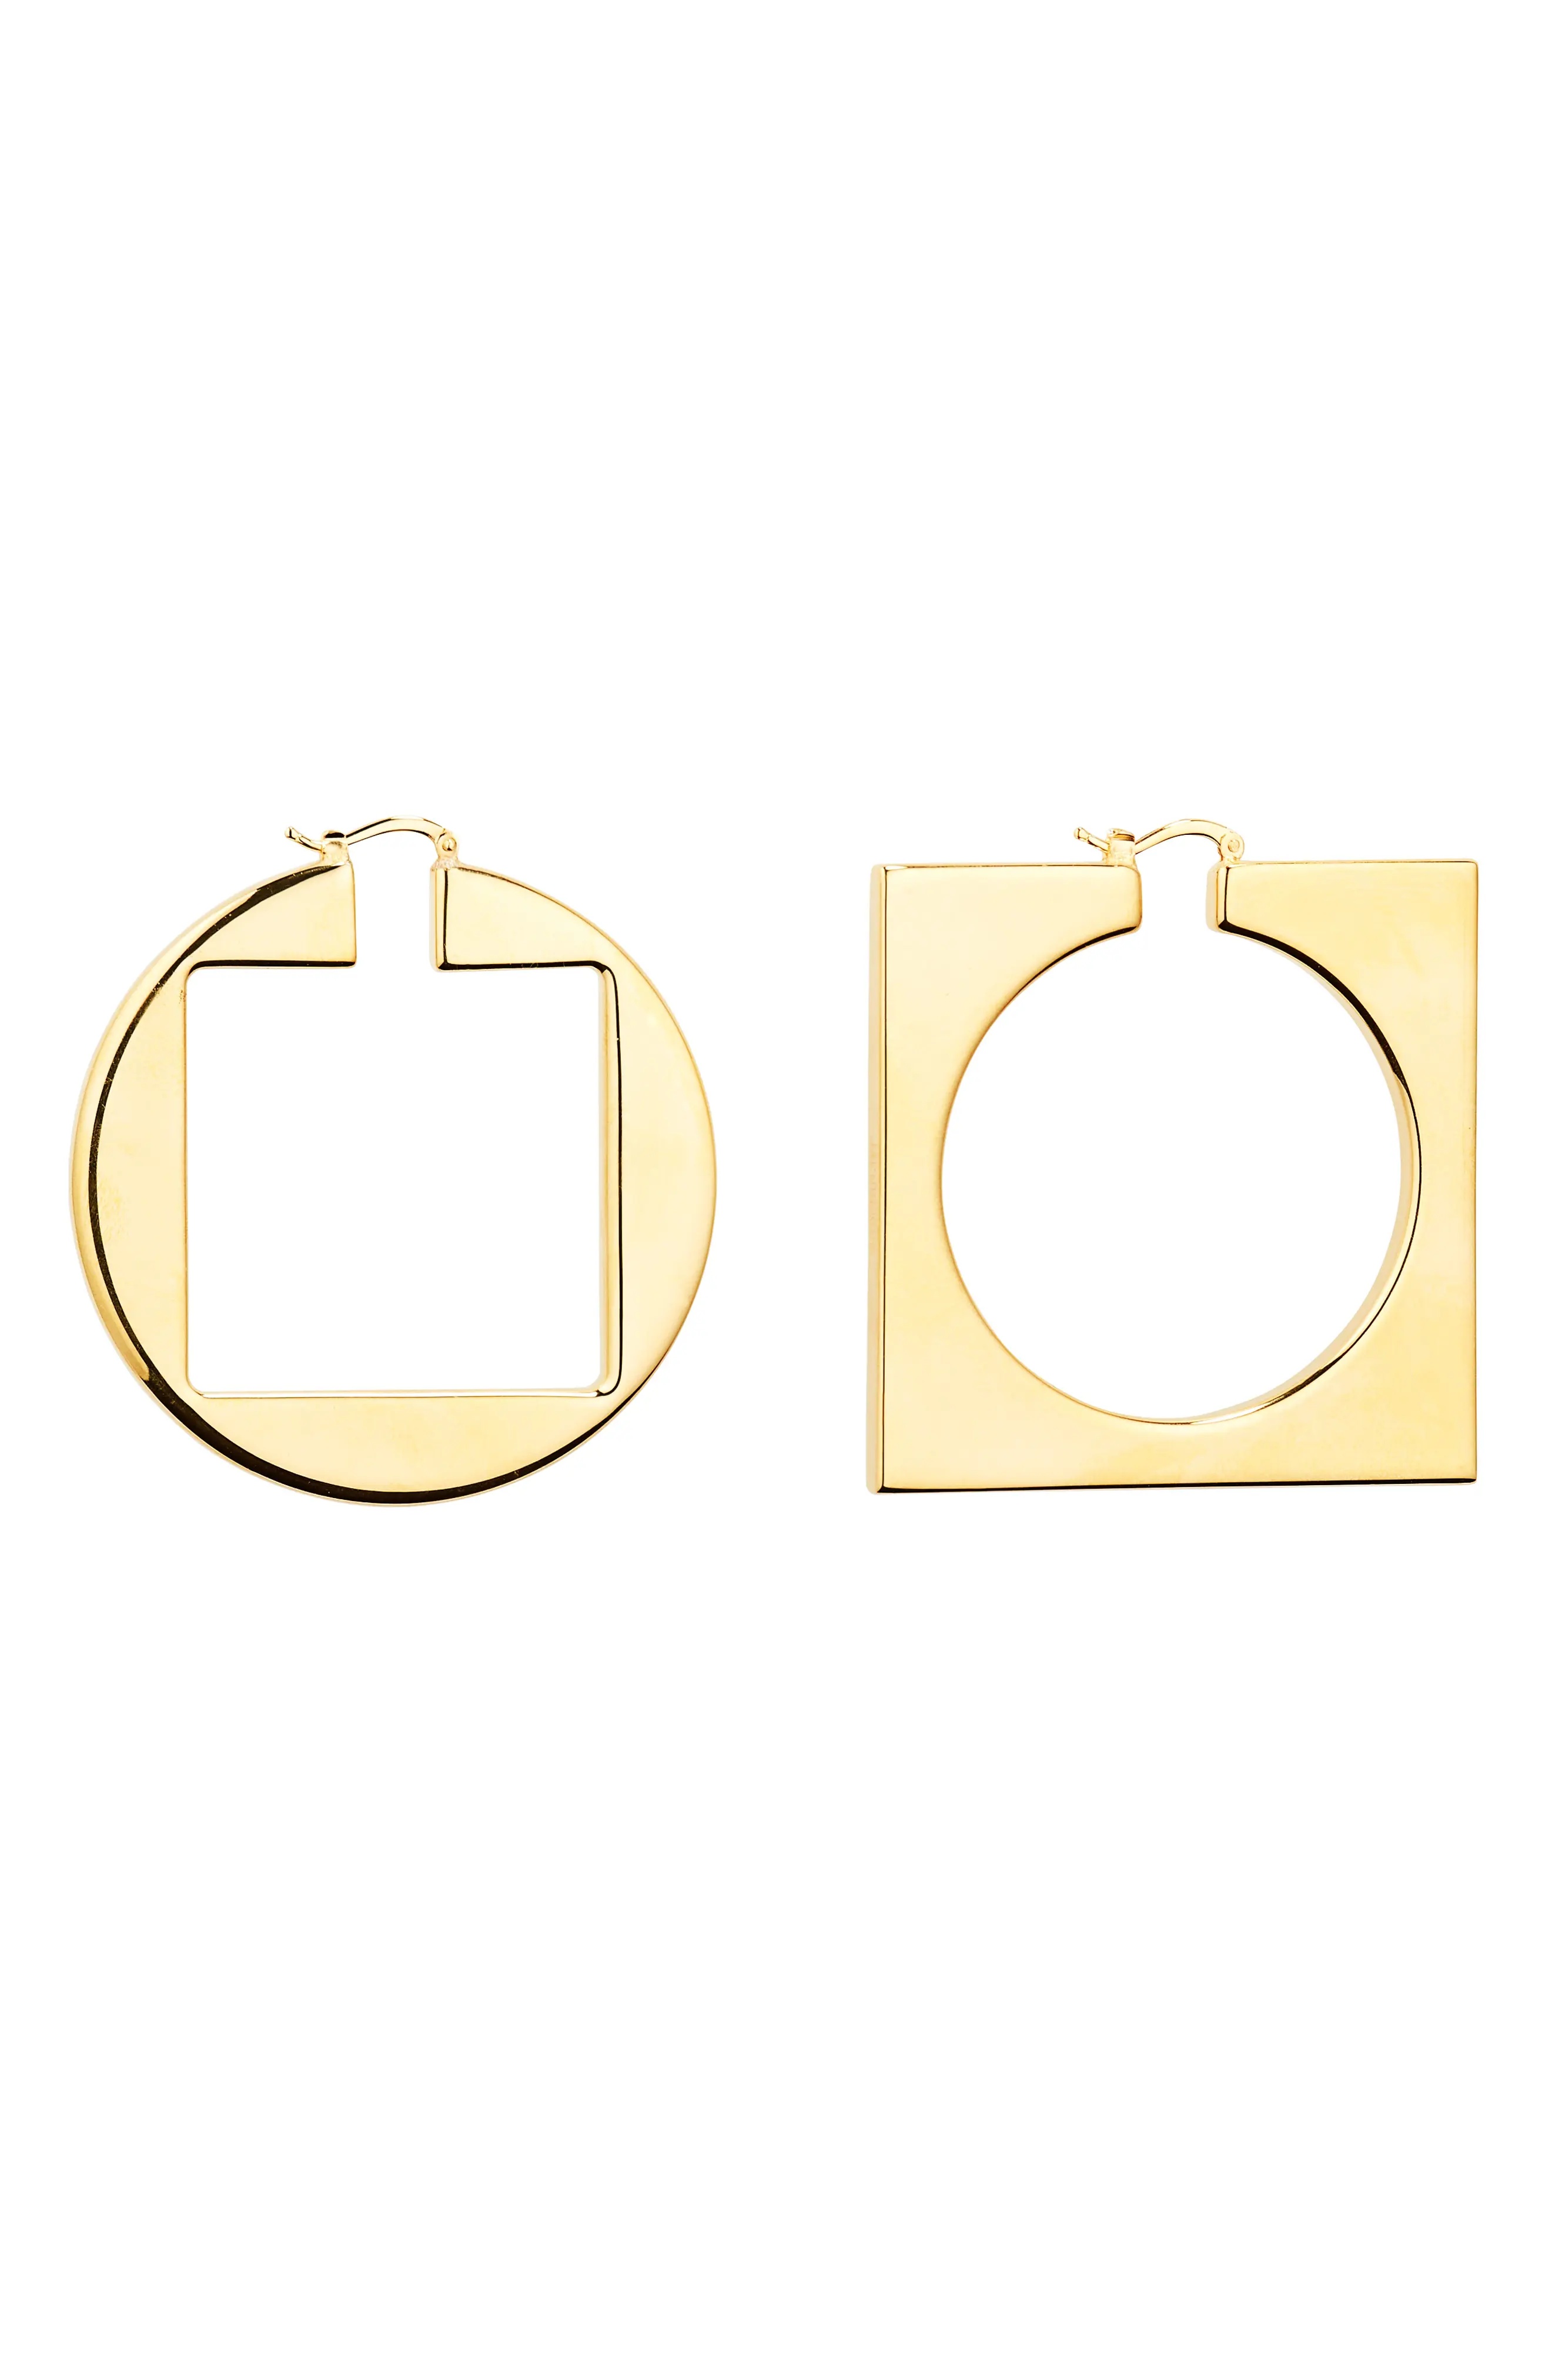 Les Creoles Rond Carré Misamatched Earrings - 4